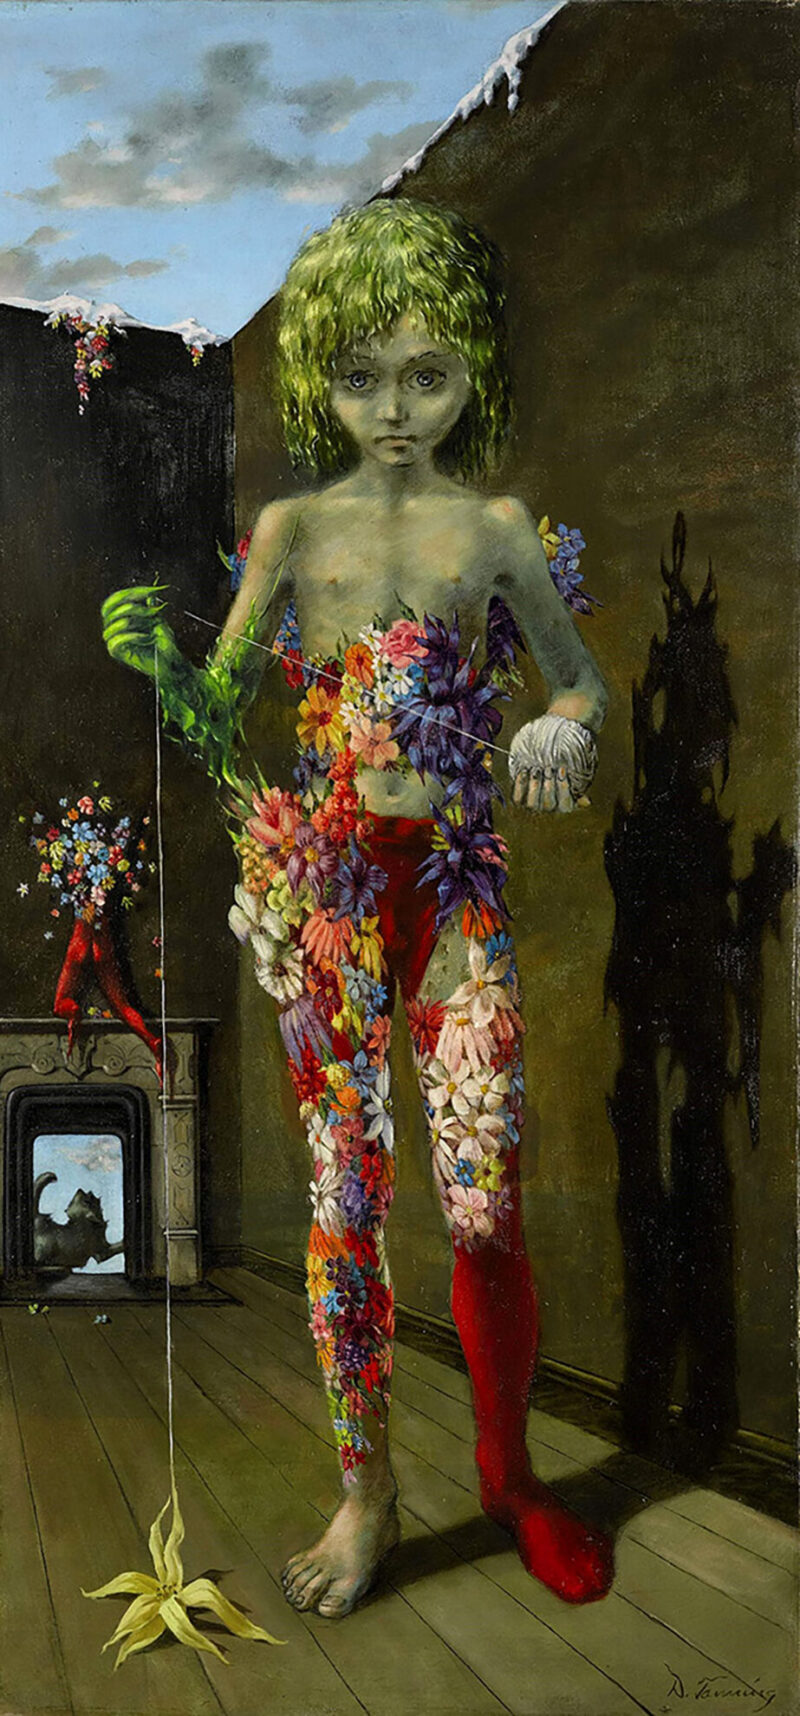 Dorothea Tanning, The magic flower game